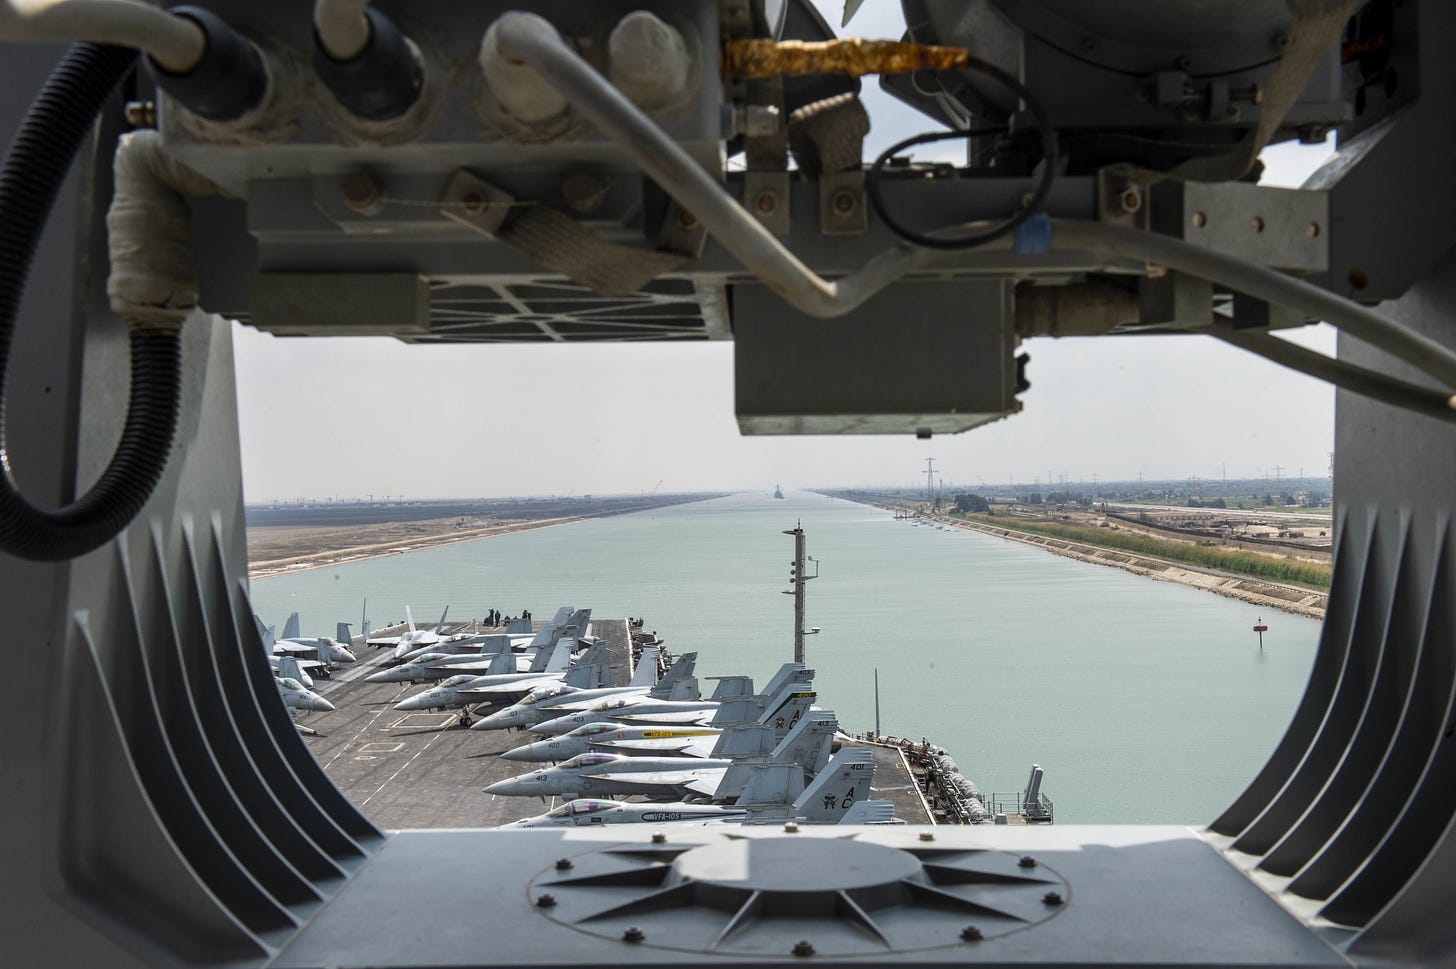 An aircraft carrier transits the Suez Canal. It has many planes on deck.